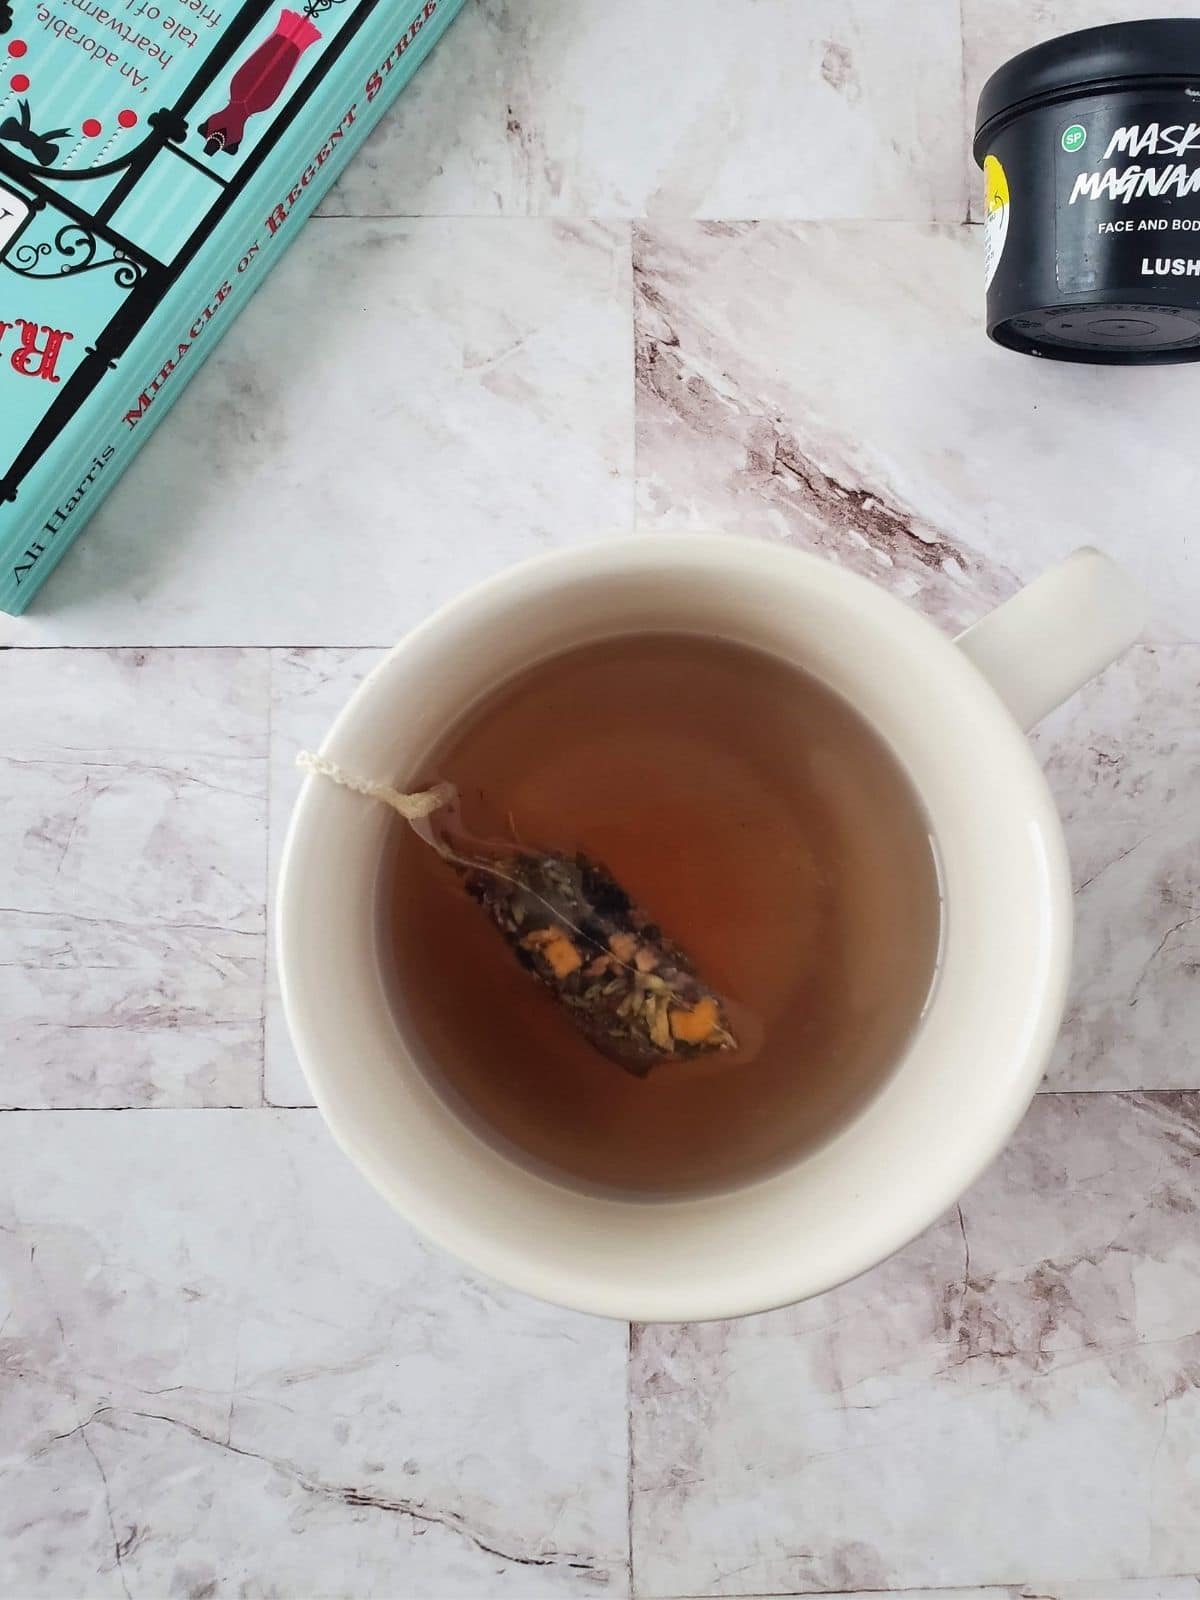 A mug of tea in the center of the photo and around it is a book and a face mask.